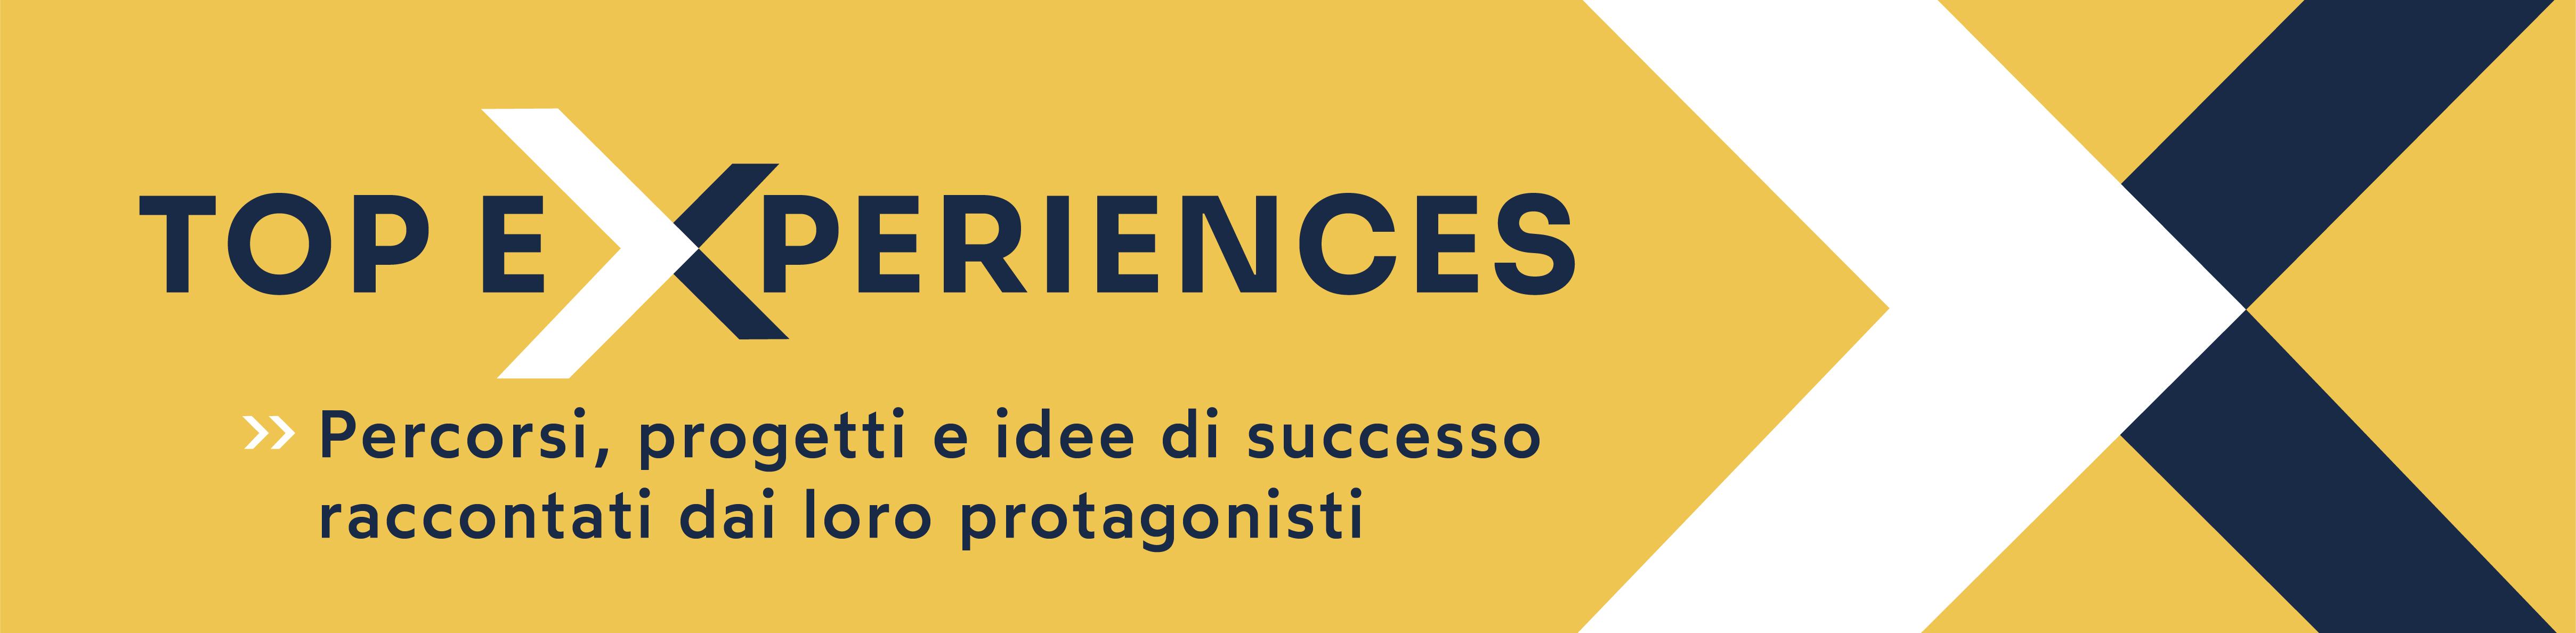 Banner TopExperiences